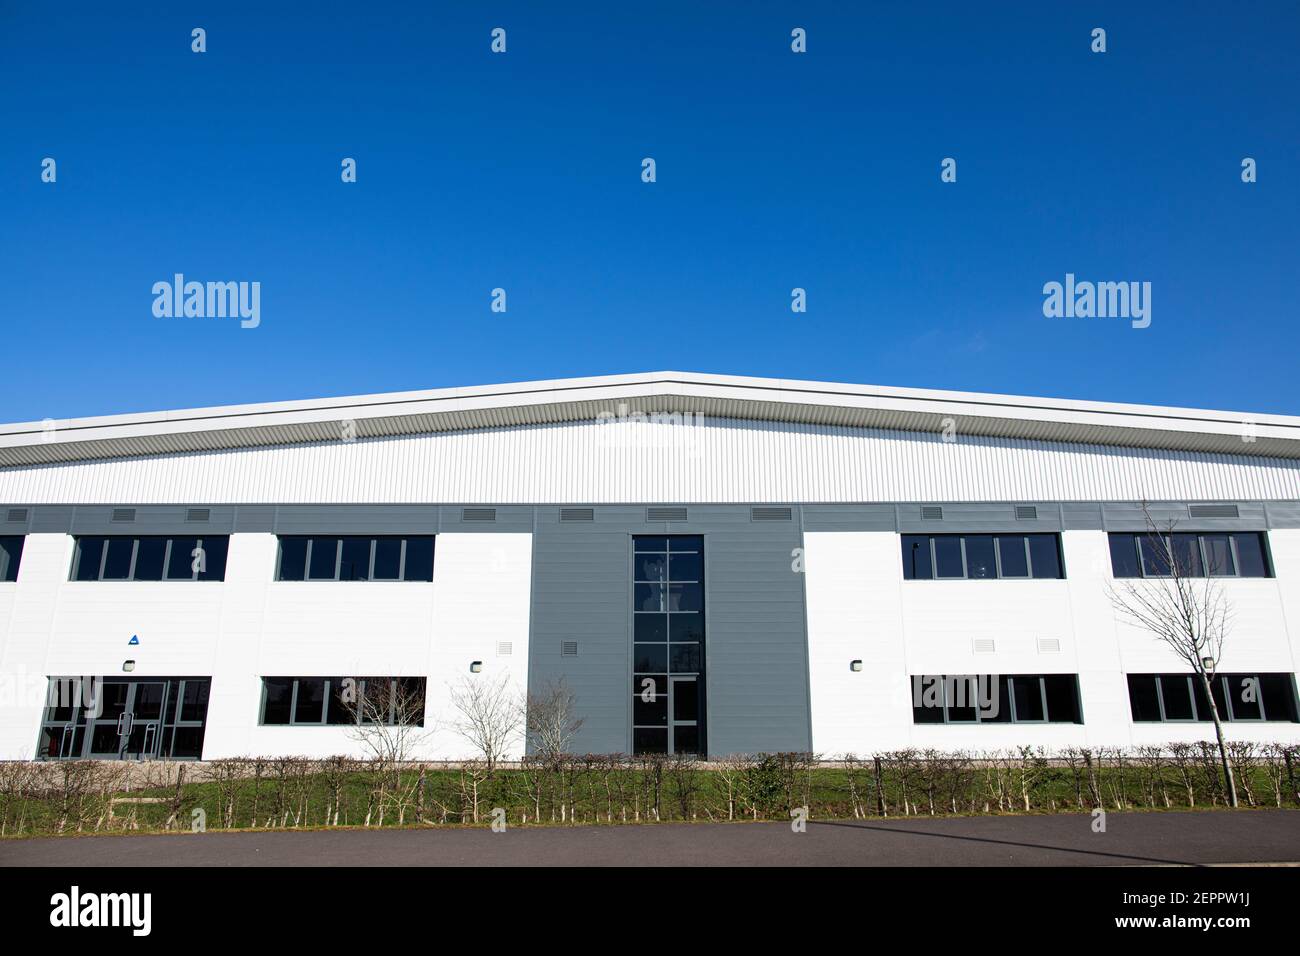 Saint Gobain Abrasives site in Stafford, England.The head office of Saint-Gobain Abrasives UK and home to approximately 93 employees. Stock Photo